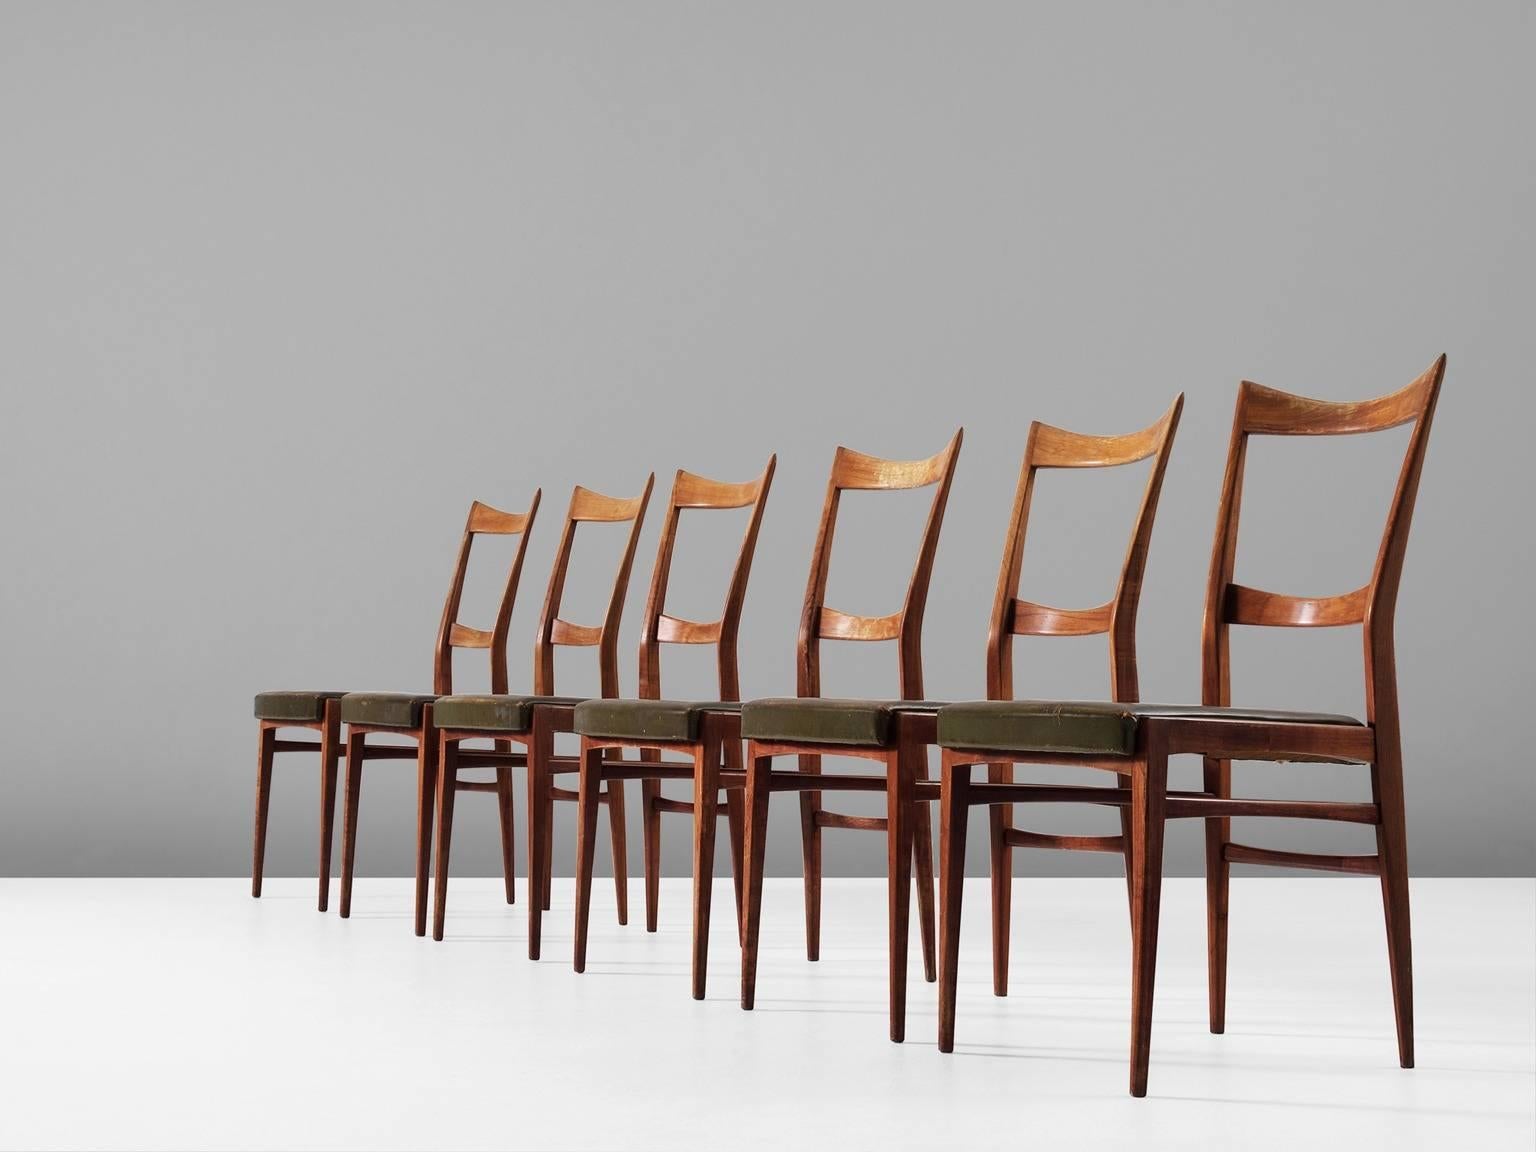 Set of six dining chairs, in walnut and leather, Italy, 1940s. 

Real slim designed Italian dining chairs in it's original green leather upholstery. Very well detailed wood with very smart shapes and edges. The frame of these chairs is very